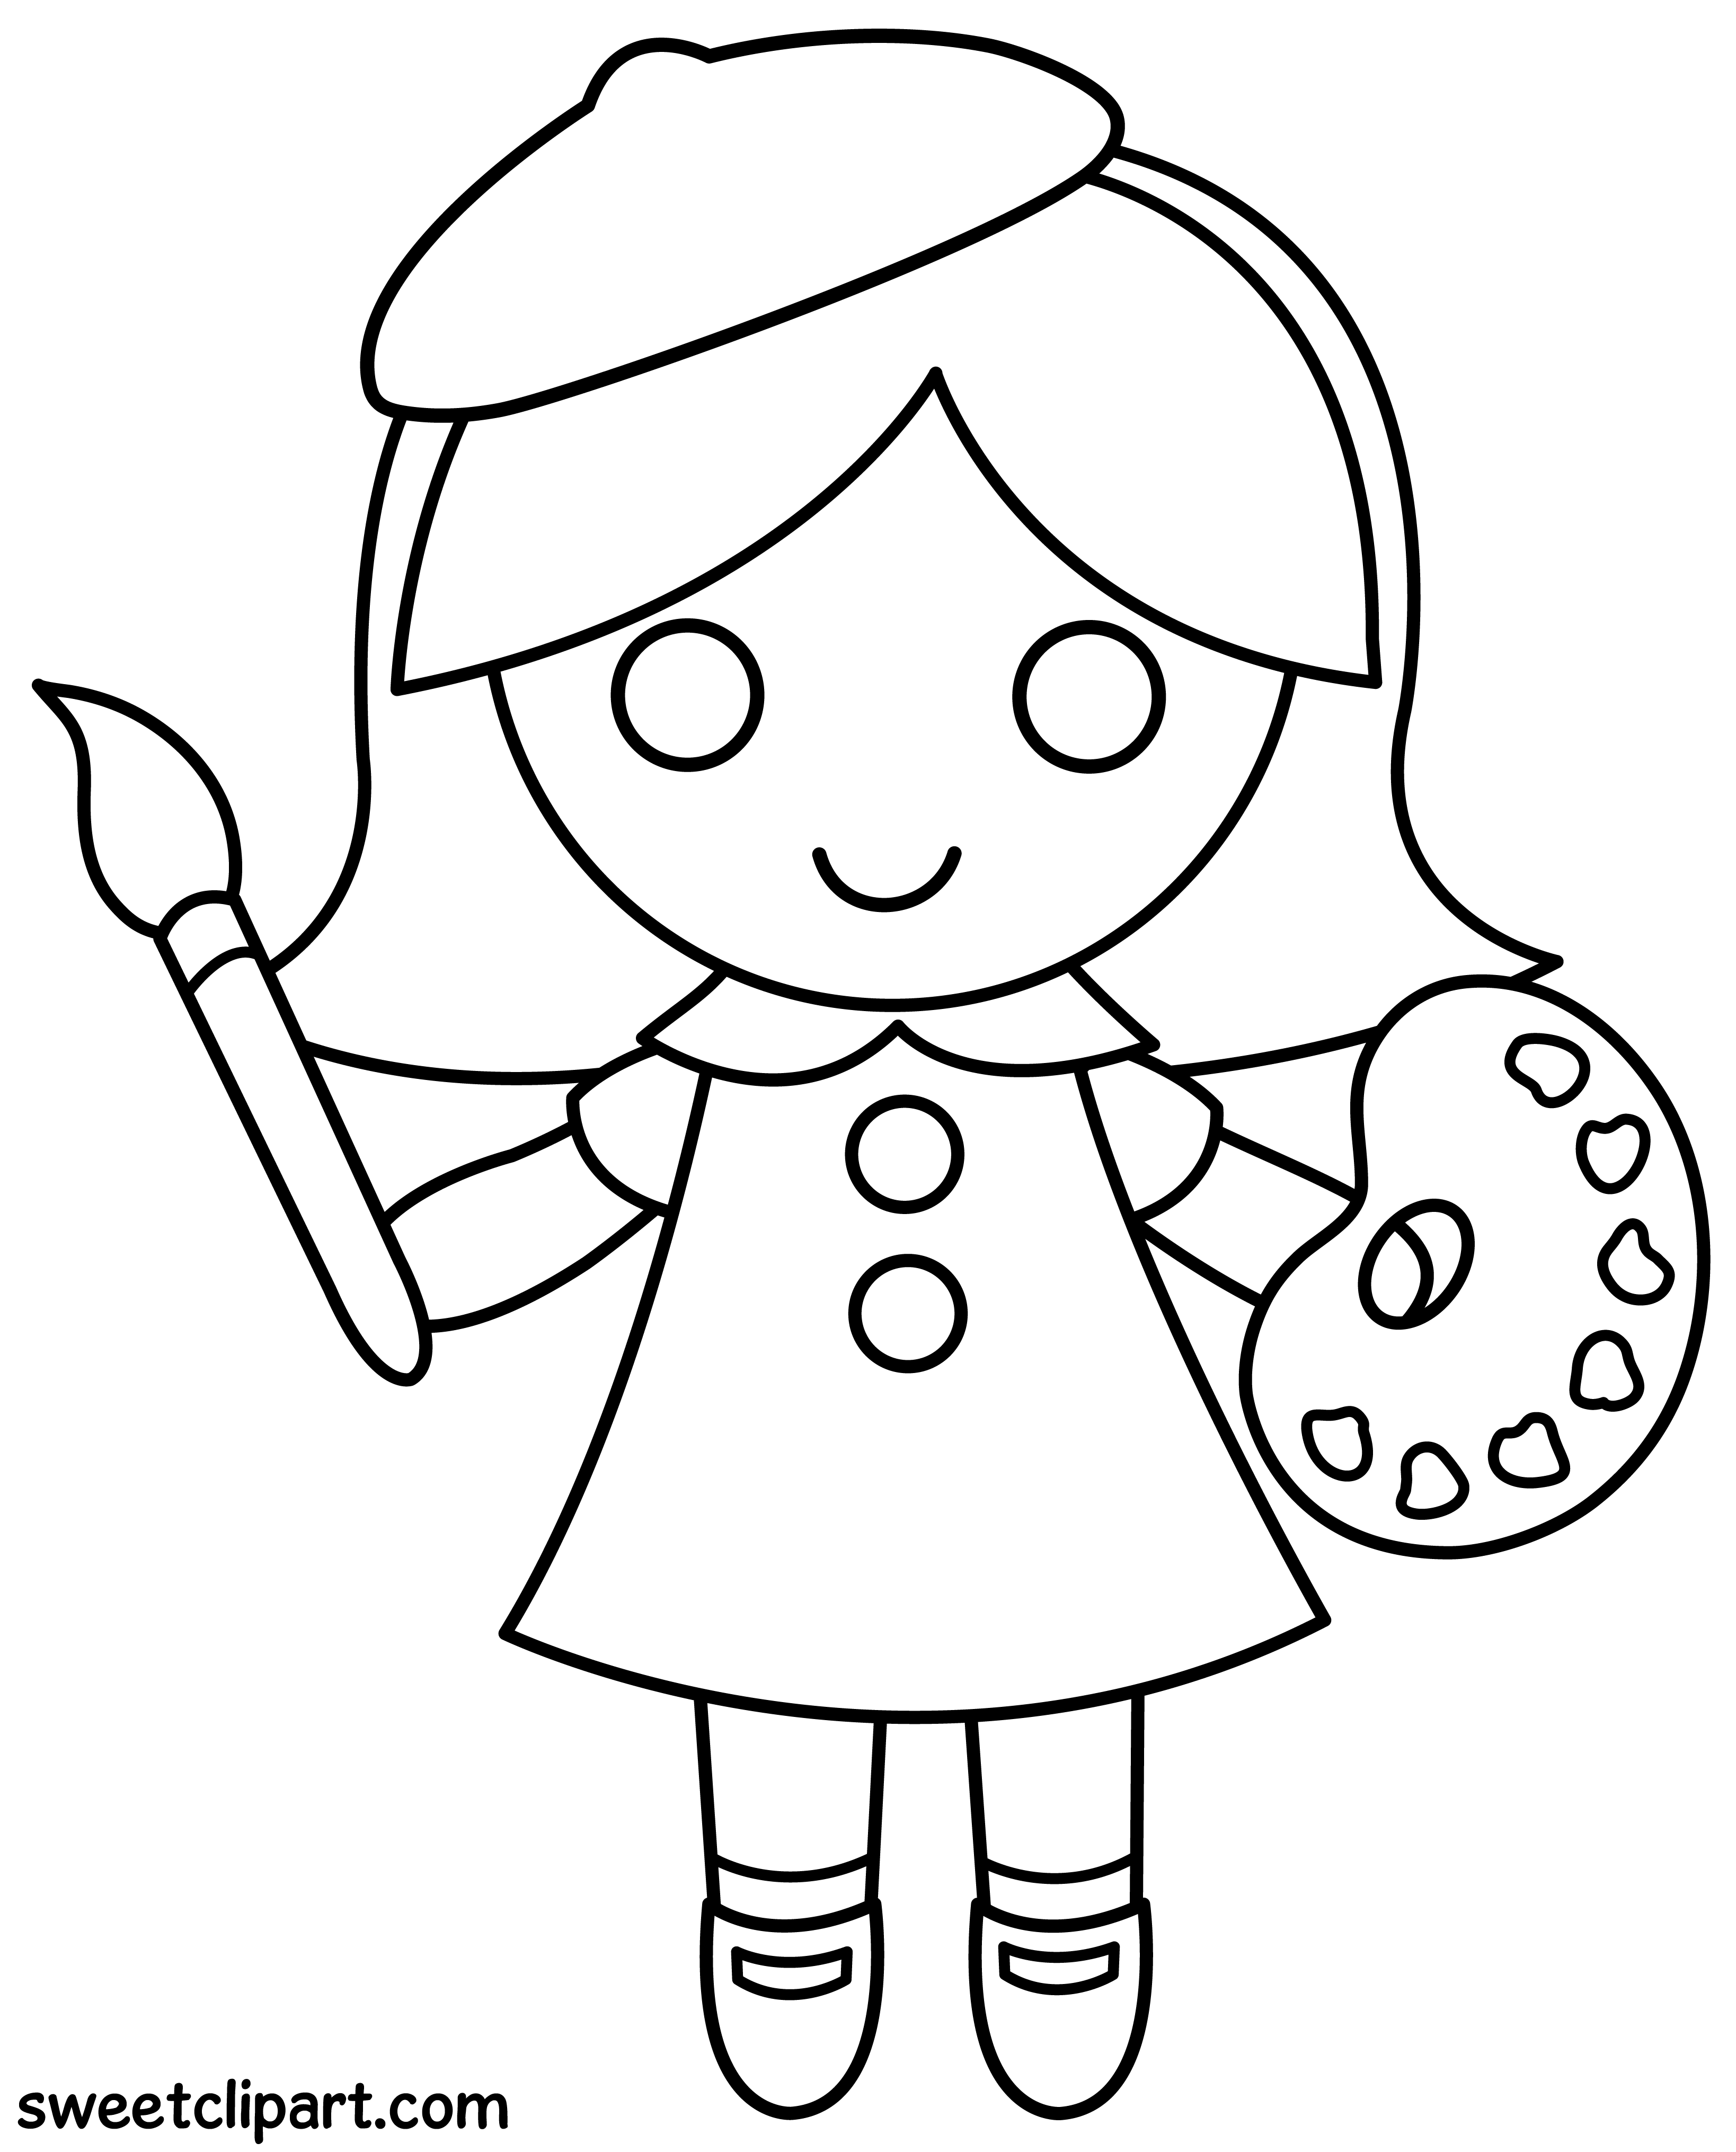 Artist page free clip. Draw clipart little girl coloring